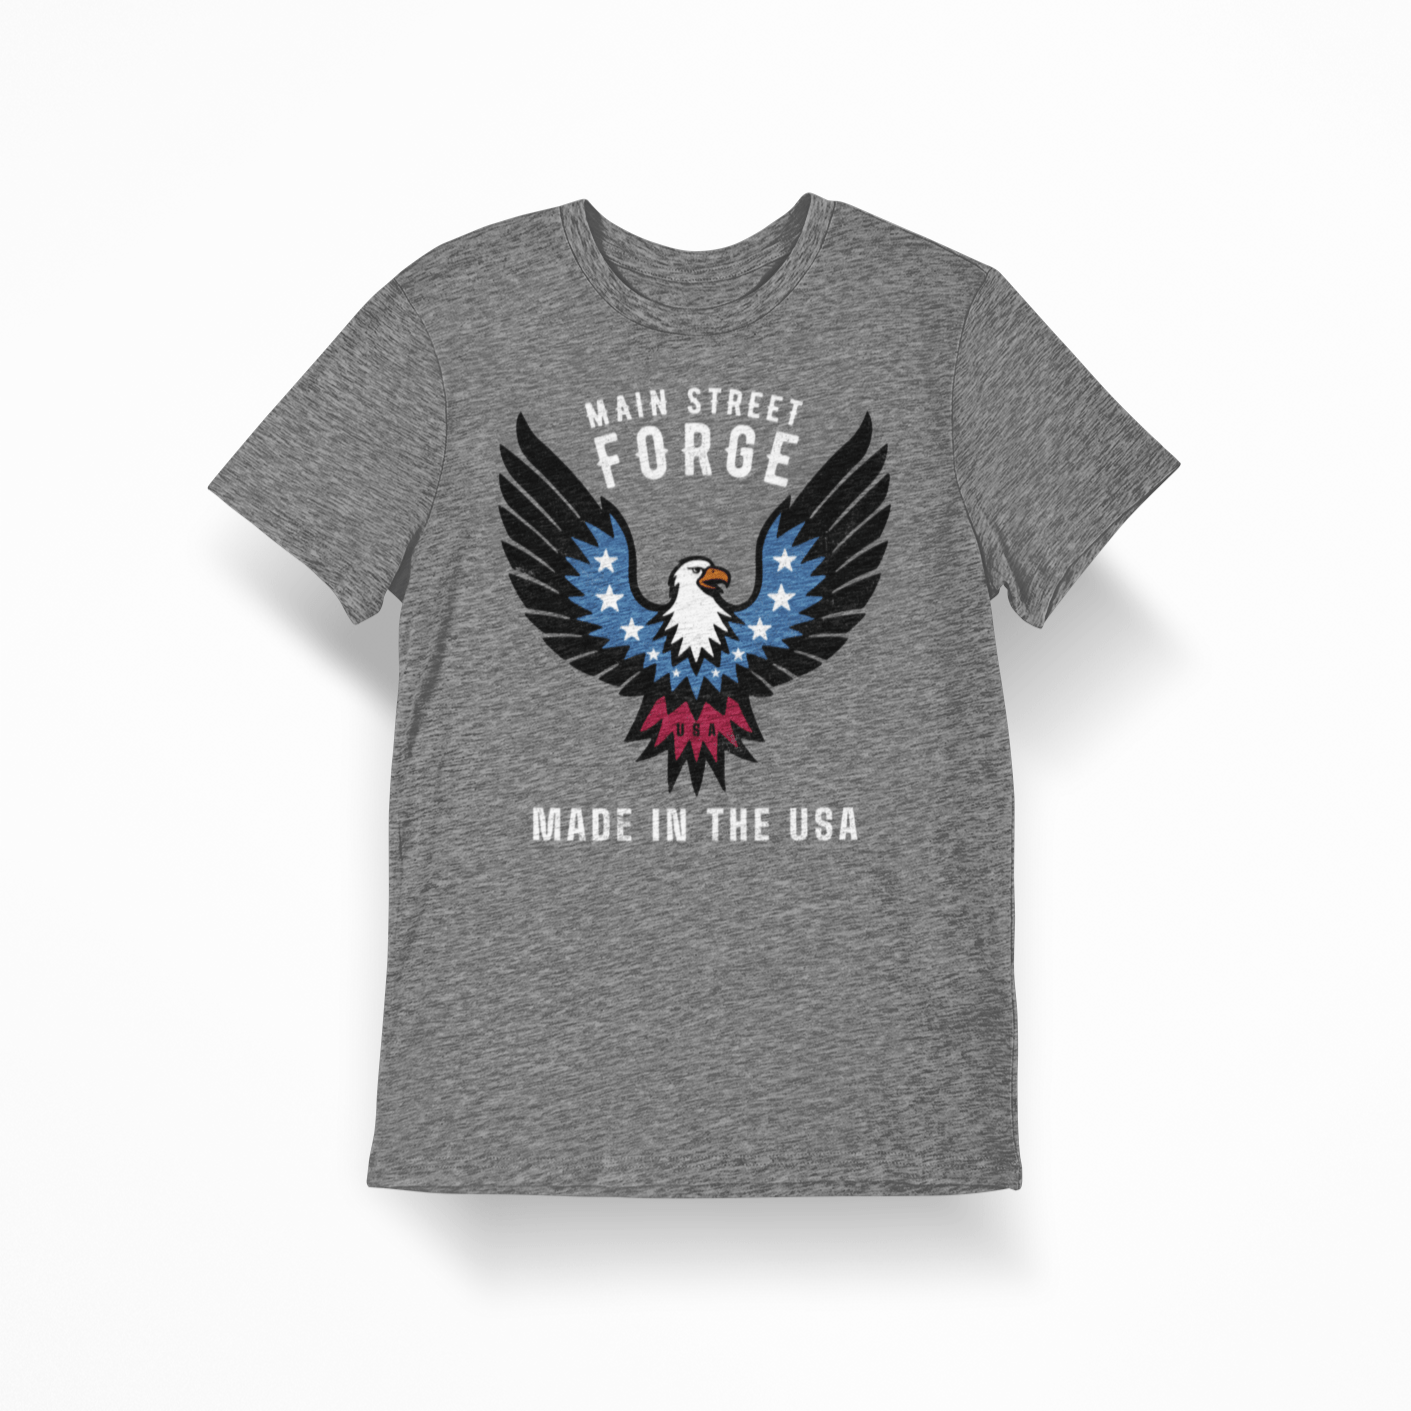 Main Street Forge - Eagle T-Shirt - Tri Blend T-Shirt - Angler's Pro Tackle & Outdoors